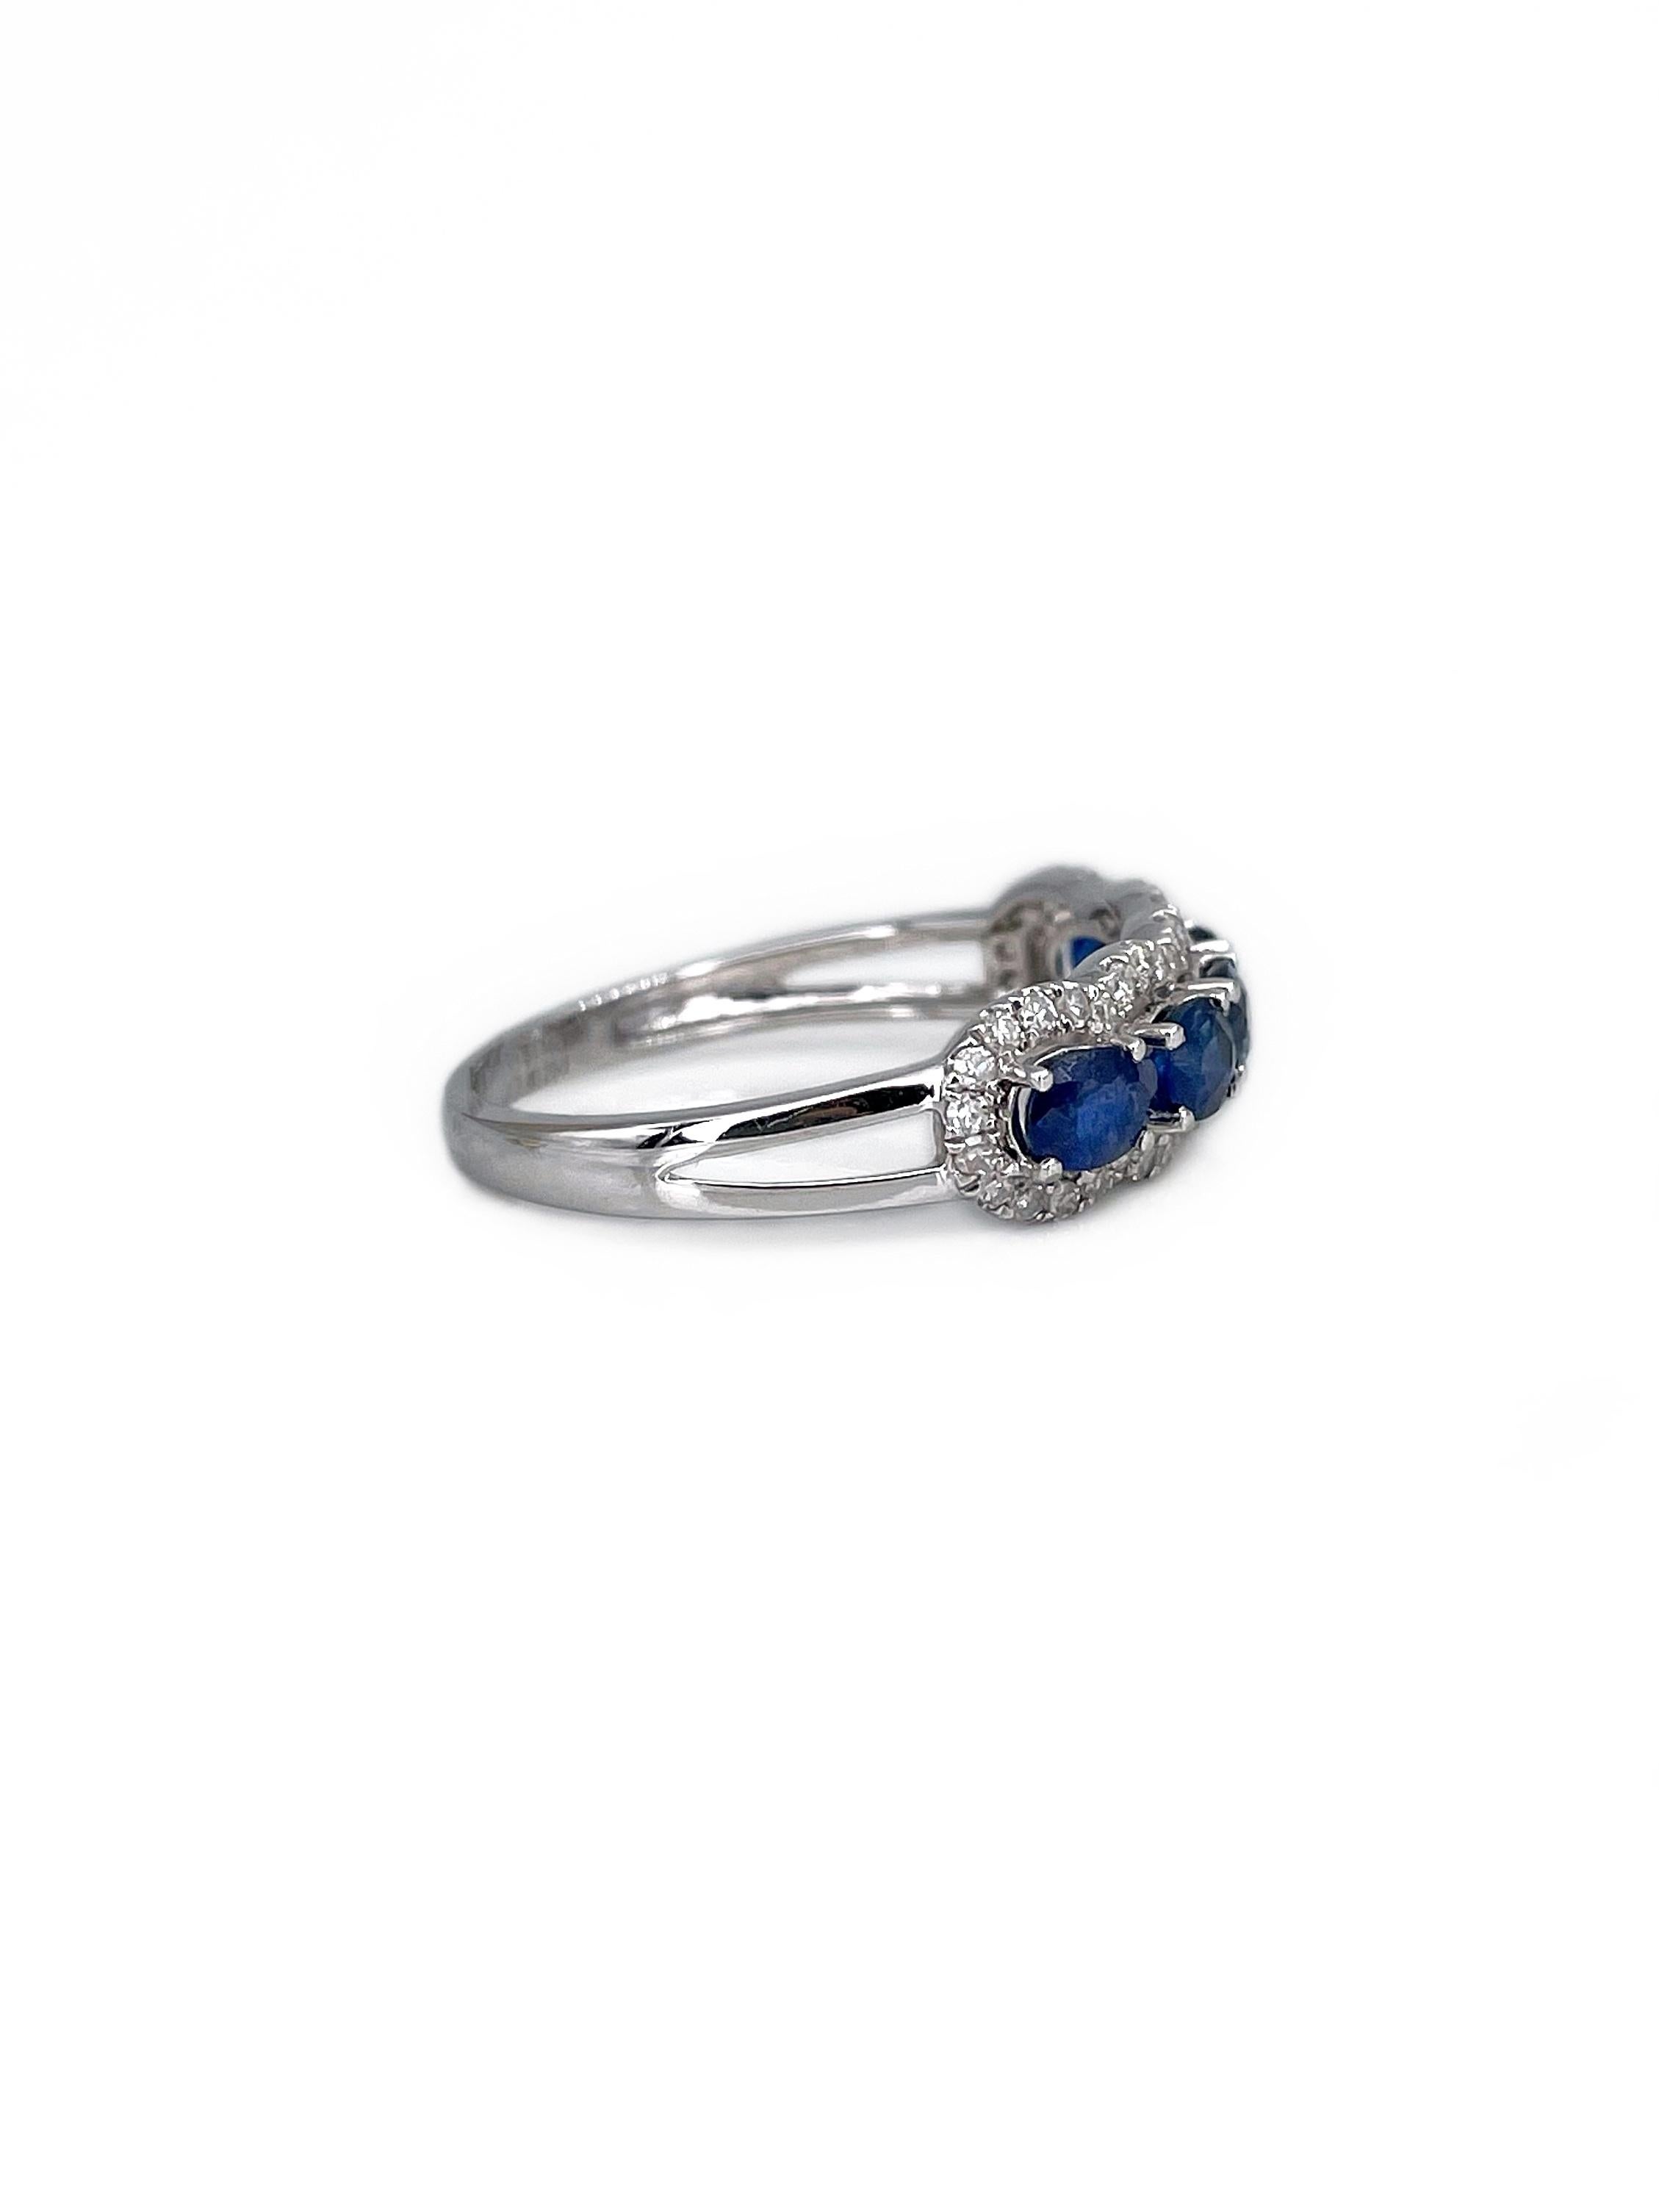 This is a modern band ring crafted in 18K white gold. The piece features 5 oval blue sapphires: TW 1.25ct, vB 5/4, VS-SI, H. The gems are accompanied with 44pcs. single cut diamonds: TW 0.22ct, W-STW, SI-P2.

Weight: 2.24g 
Size: 17.5 (US